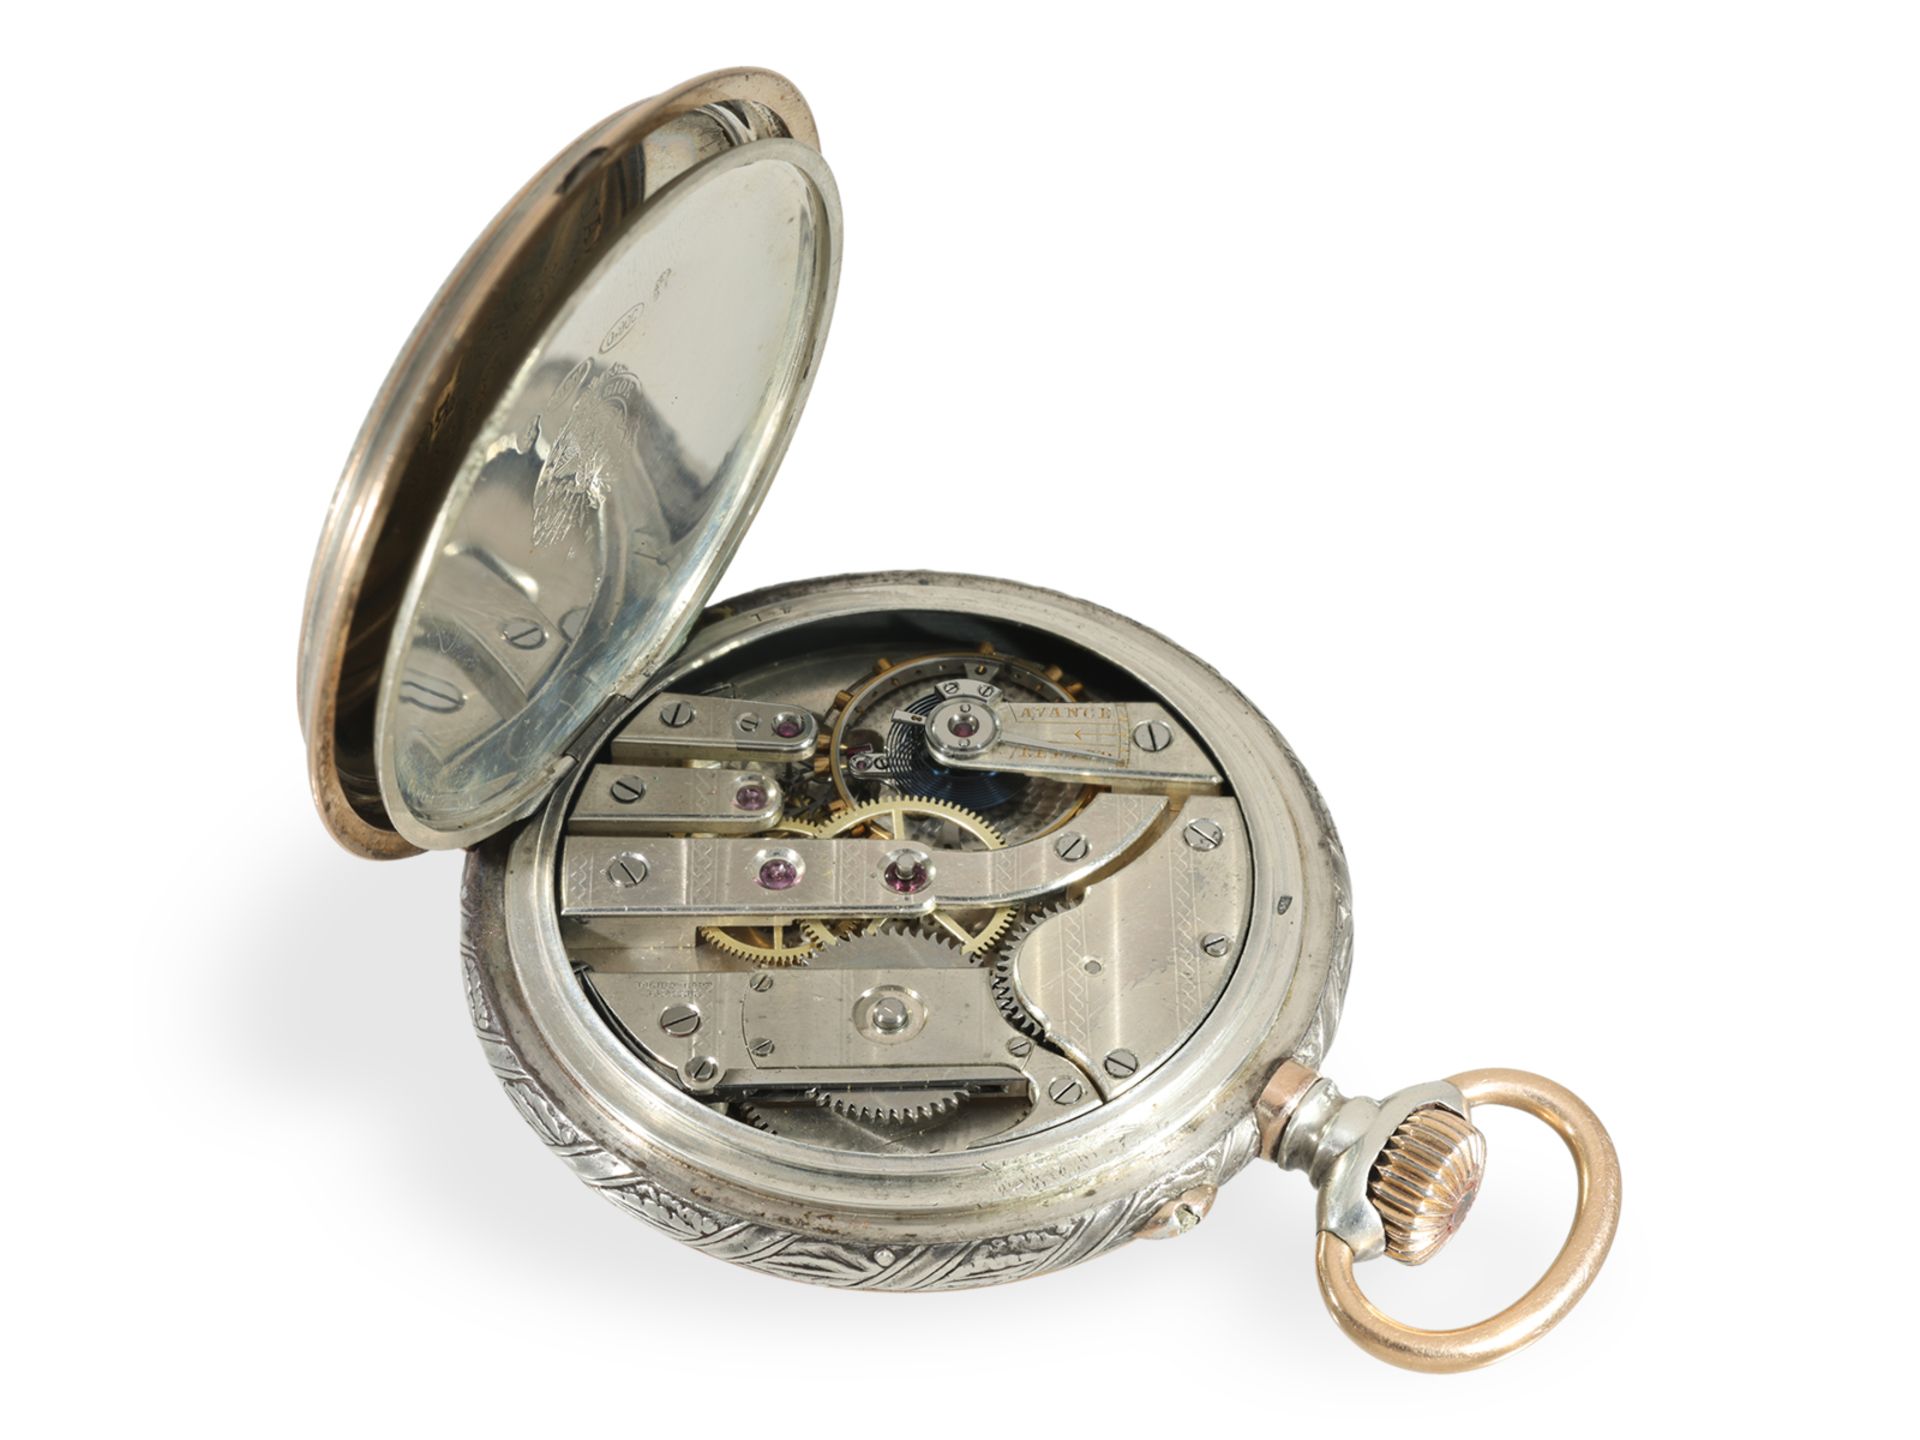 Pocket watch: very rare marksman's watch of fantastic quality, Piguet-Capt Lausanne 1894 - Image 3 of 5